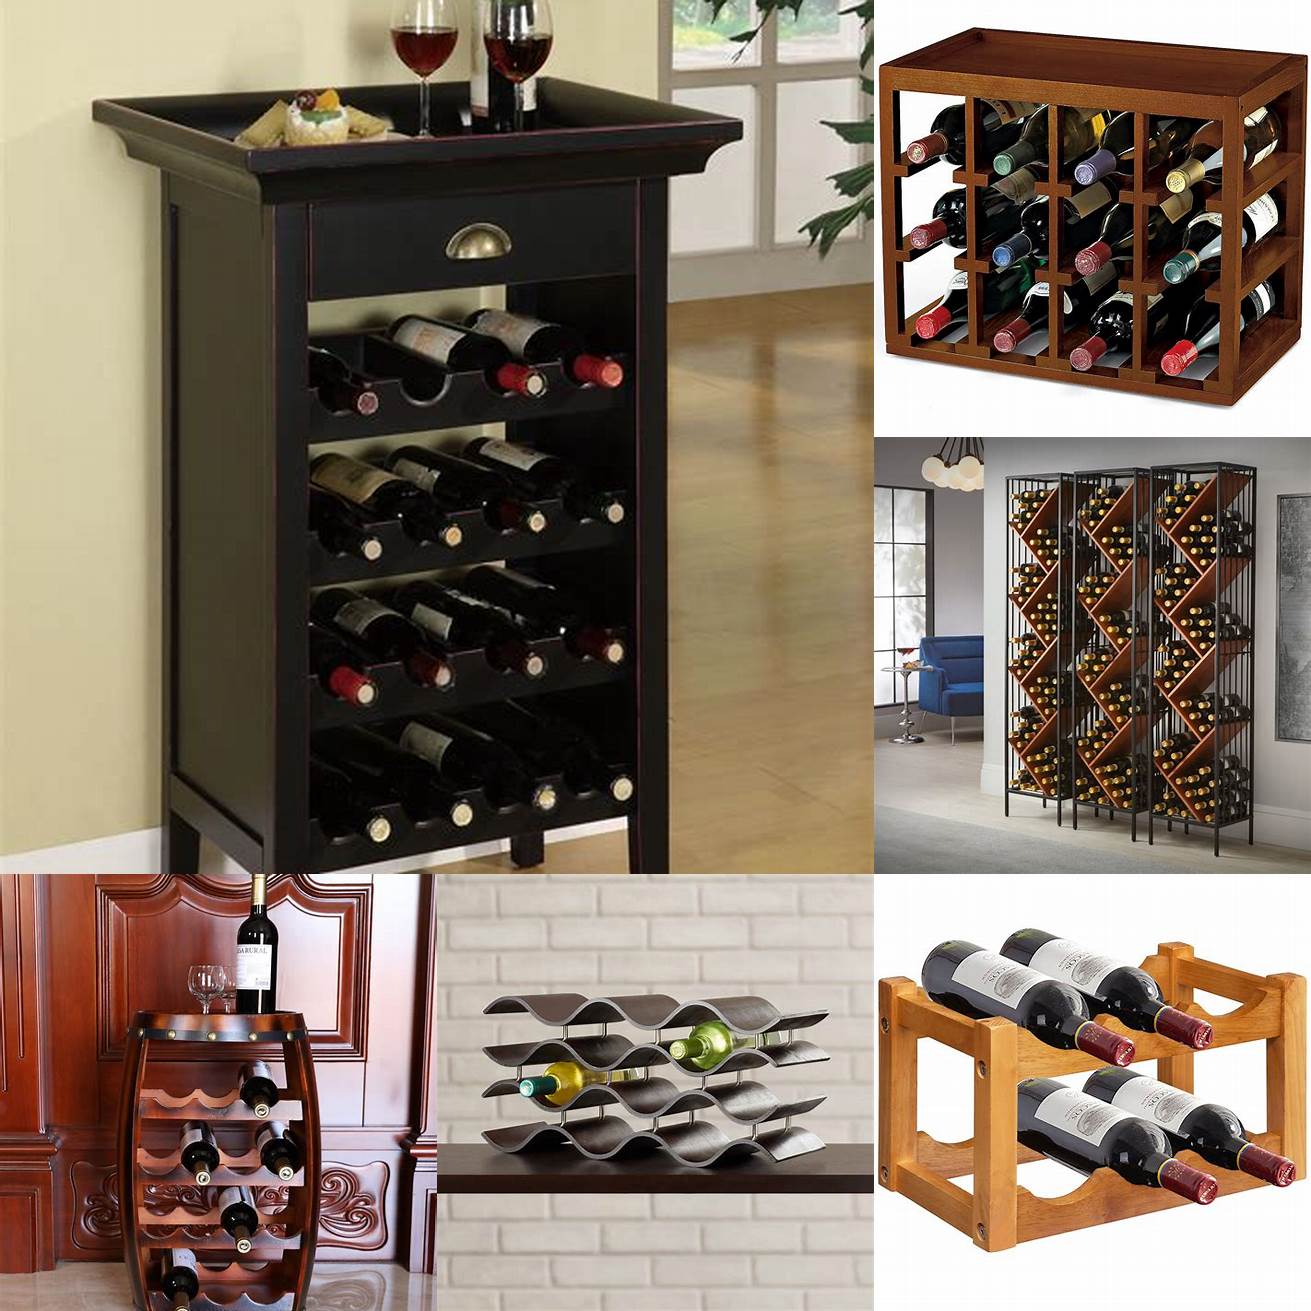 Image of a wine cabinet with adjustable racks